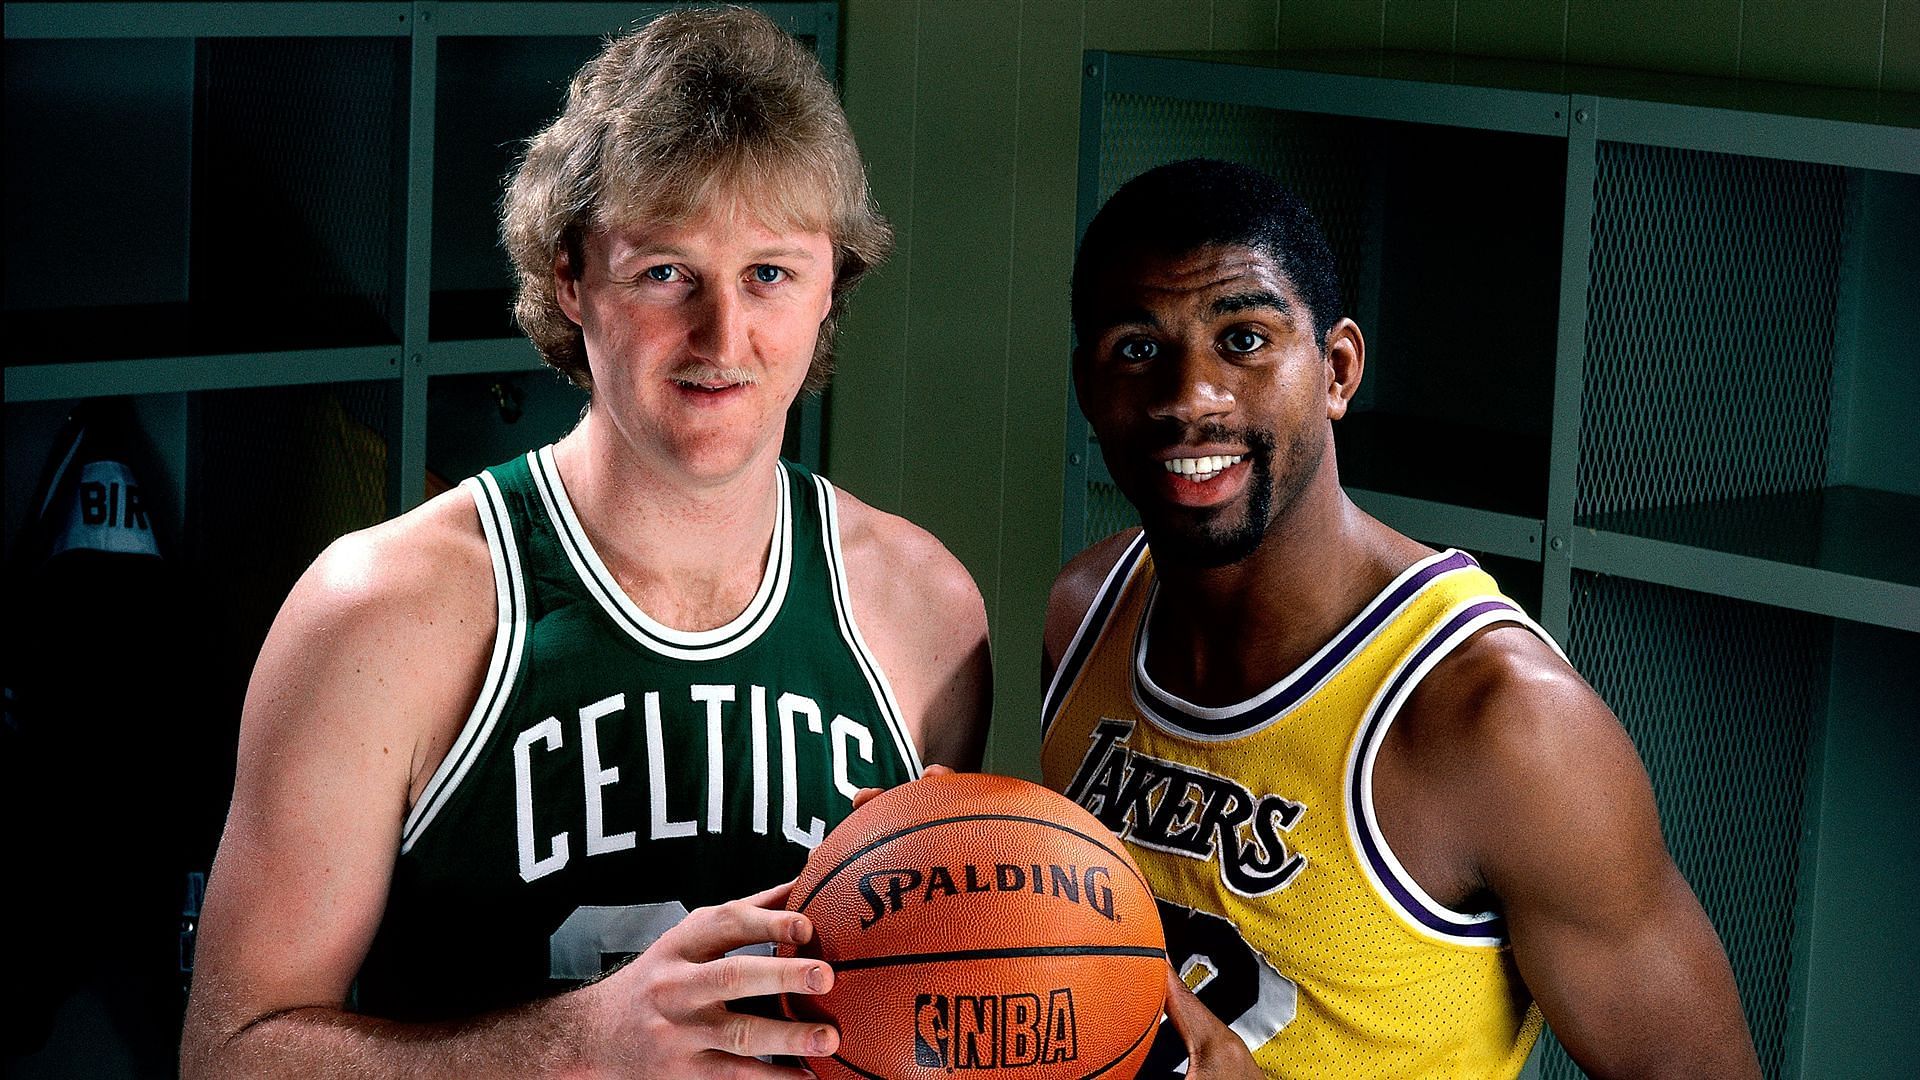 Magic would beat Bird twice in the 1985 and 1987 NBA Finals. [Photo: Sporting News]